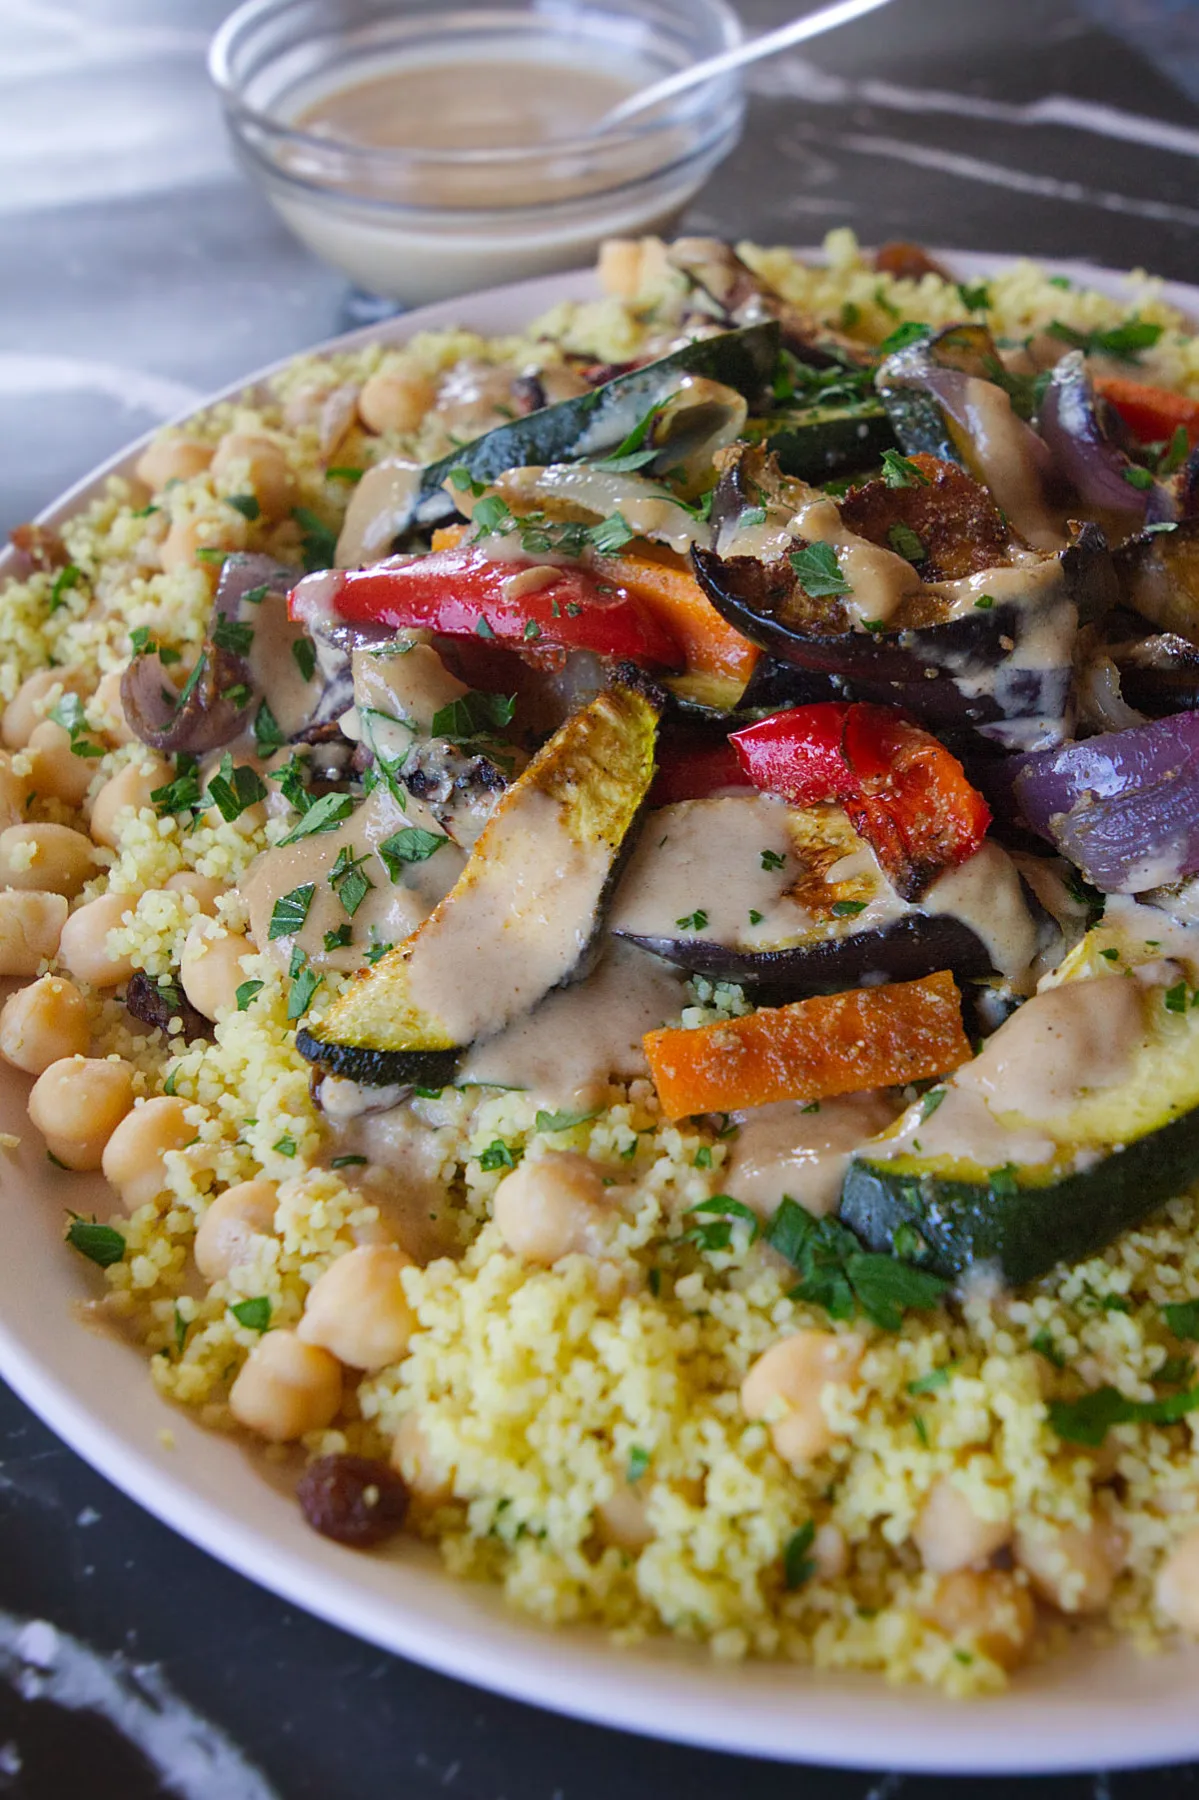 A large plate of Moroccan couscous with roast veggies and drizzled with a tahini dressing.